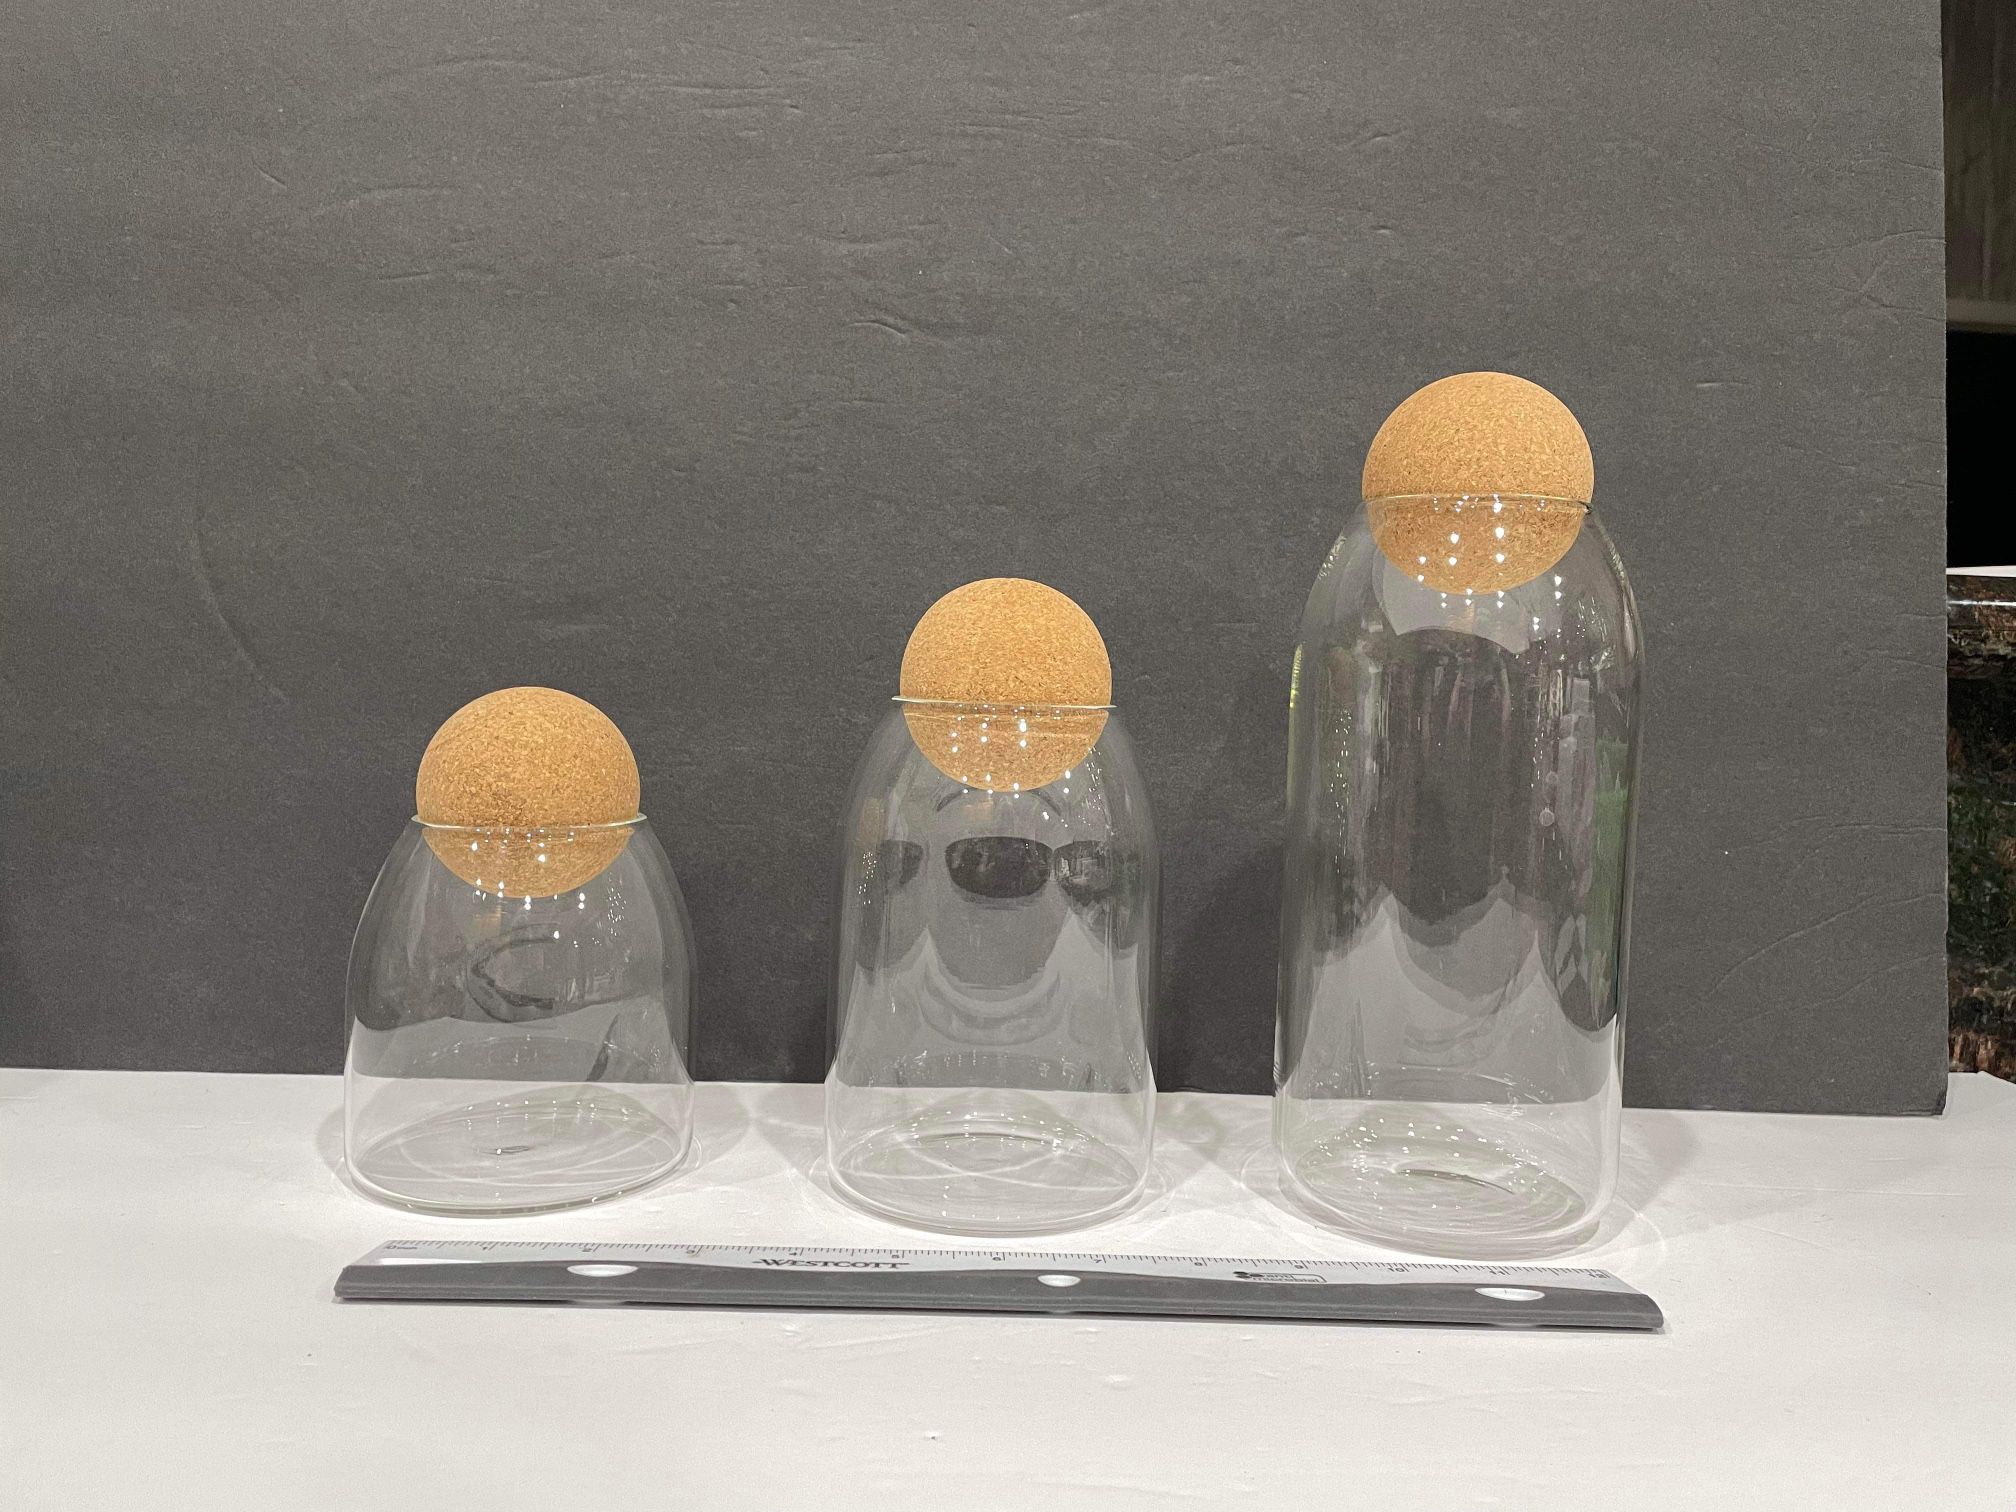 Set of 3 NEW glass storage containers with cork ball stoppers - comes in the box Coral Springs 33071